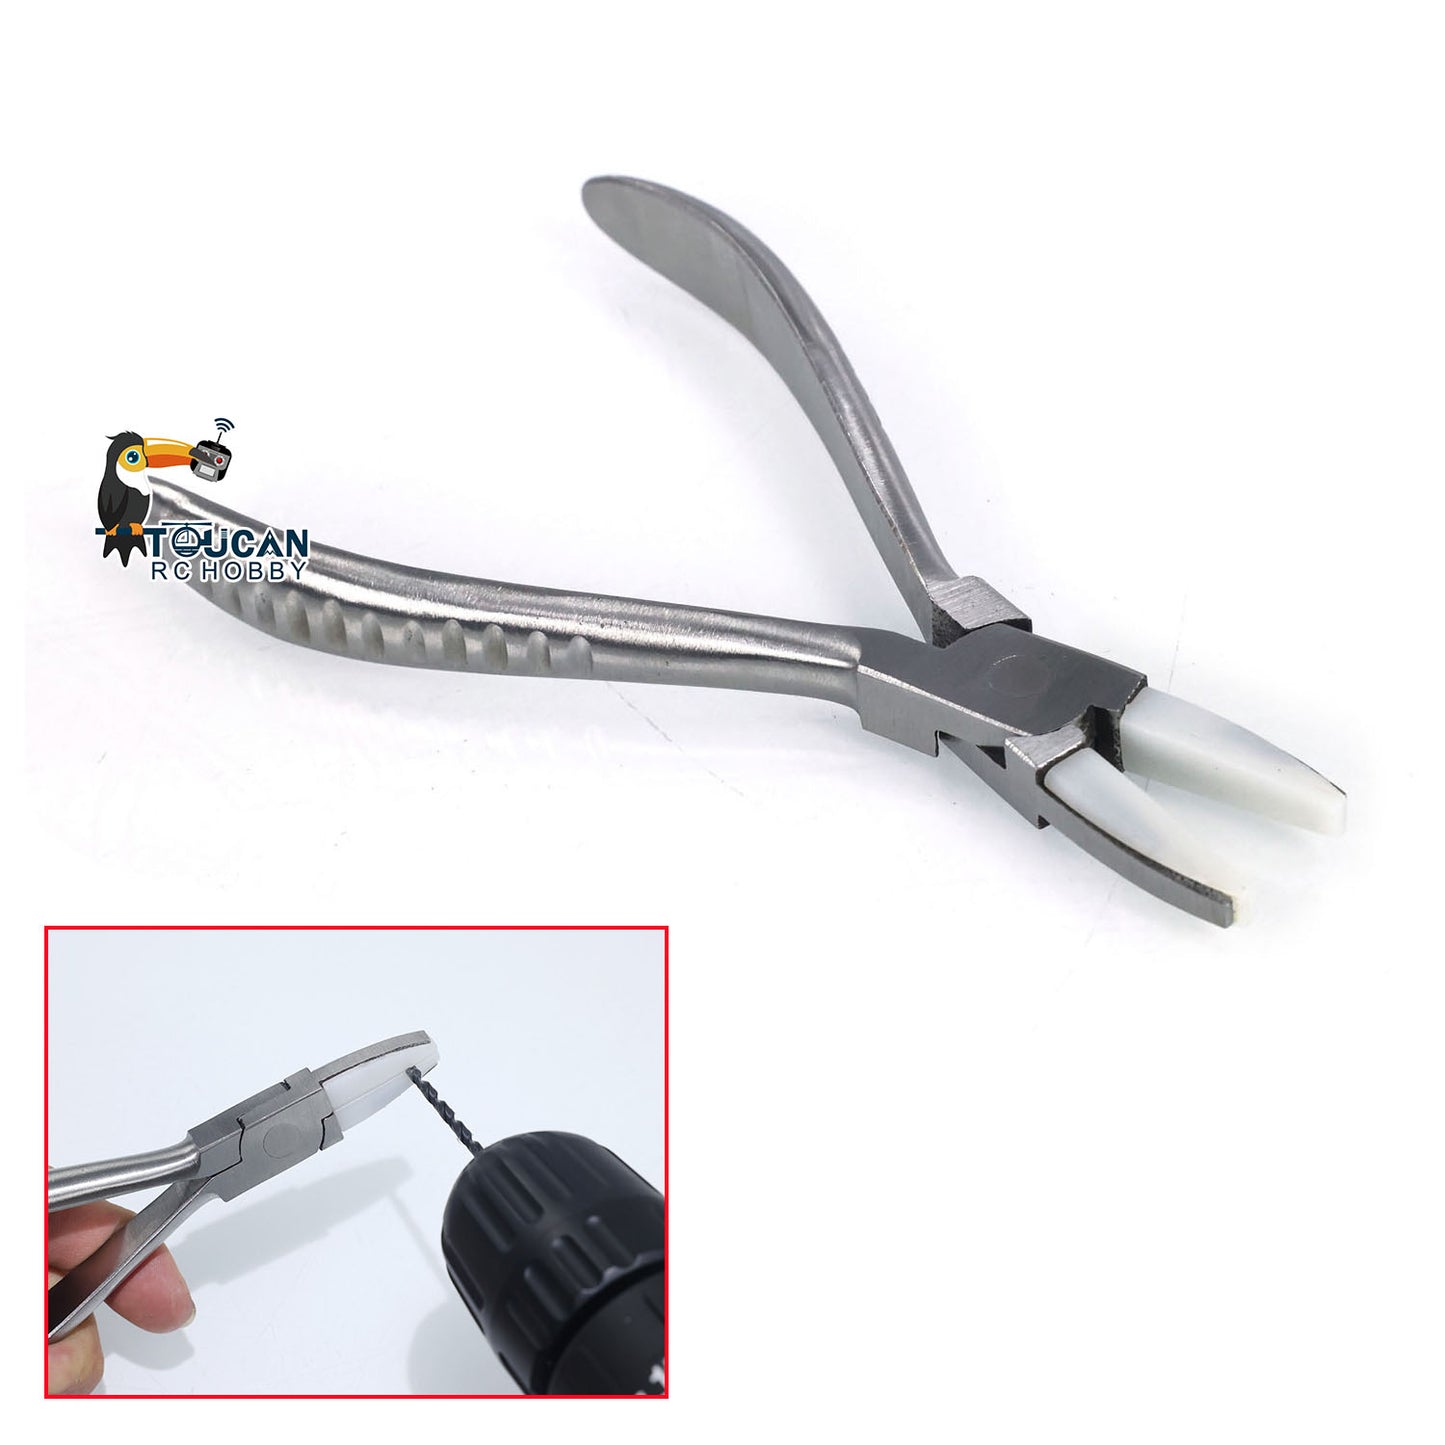 Metal Horse Scissor Oil Tube Shears Flat Nose Pliers for RC Hydraulic Excavator Cars Trucks Radio Controlled Construction Vehicle